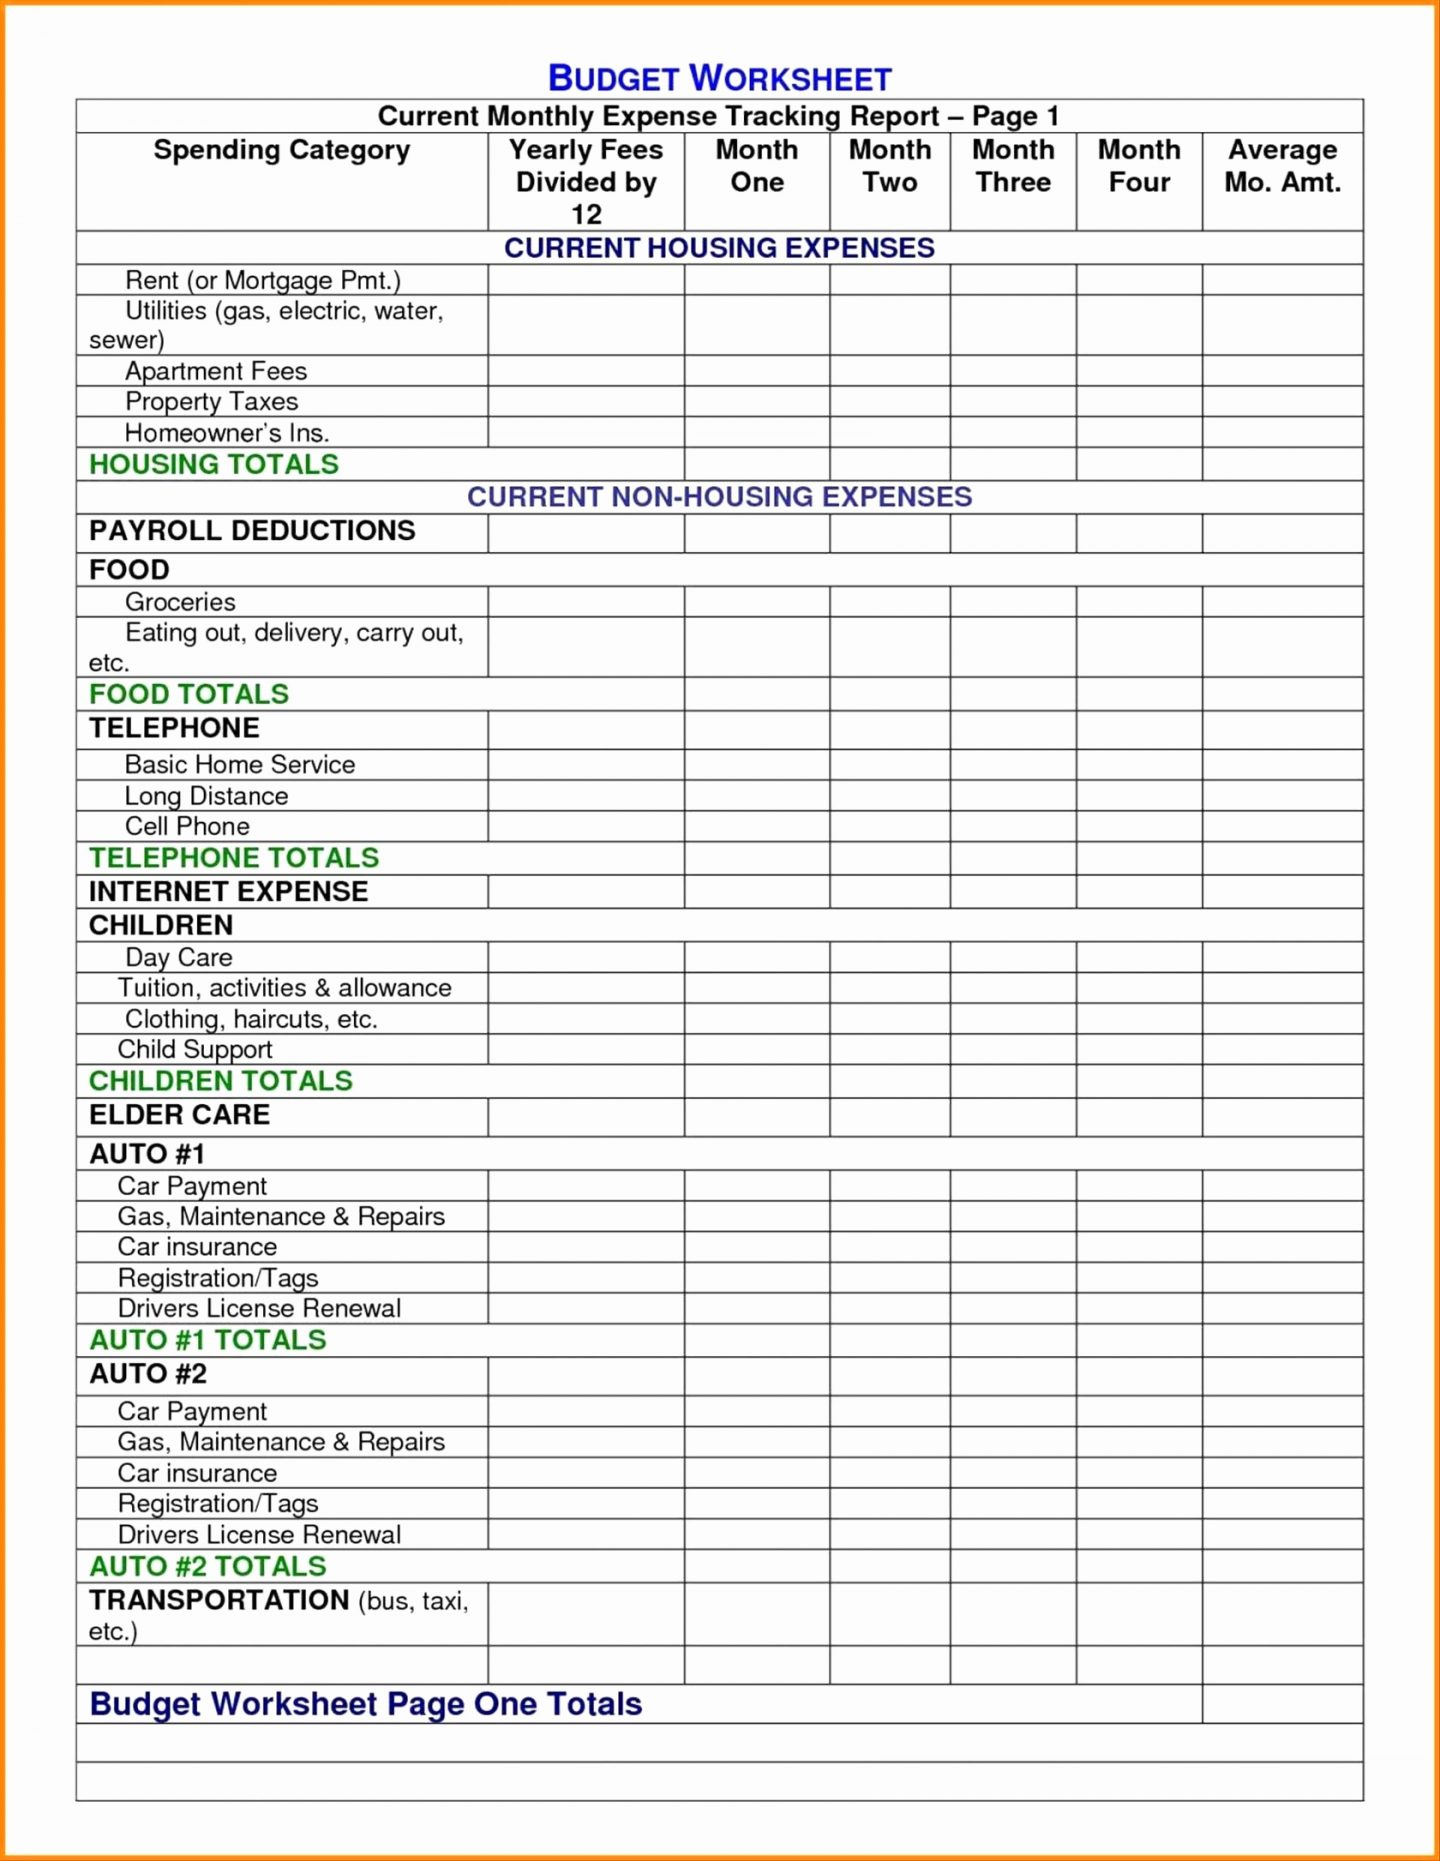 Startup Expenses Spreadsheet pertaining to Business Start Up Costs